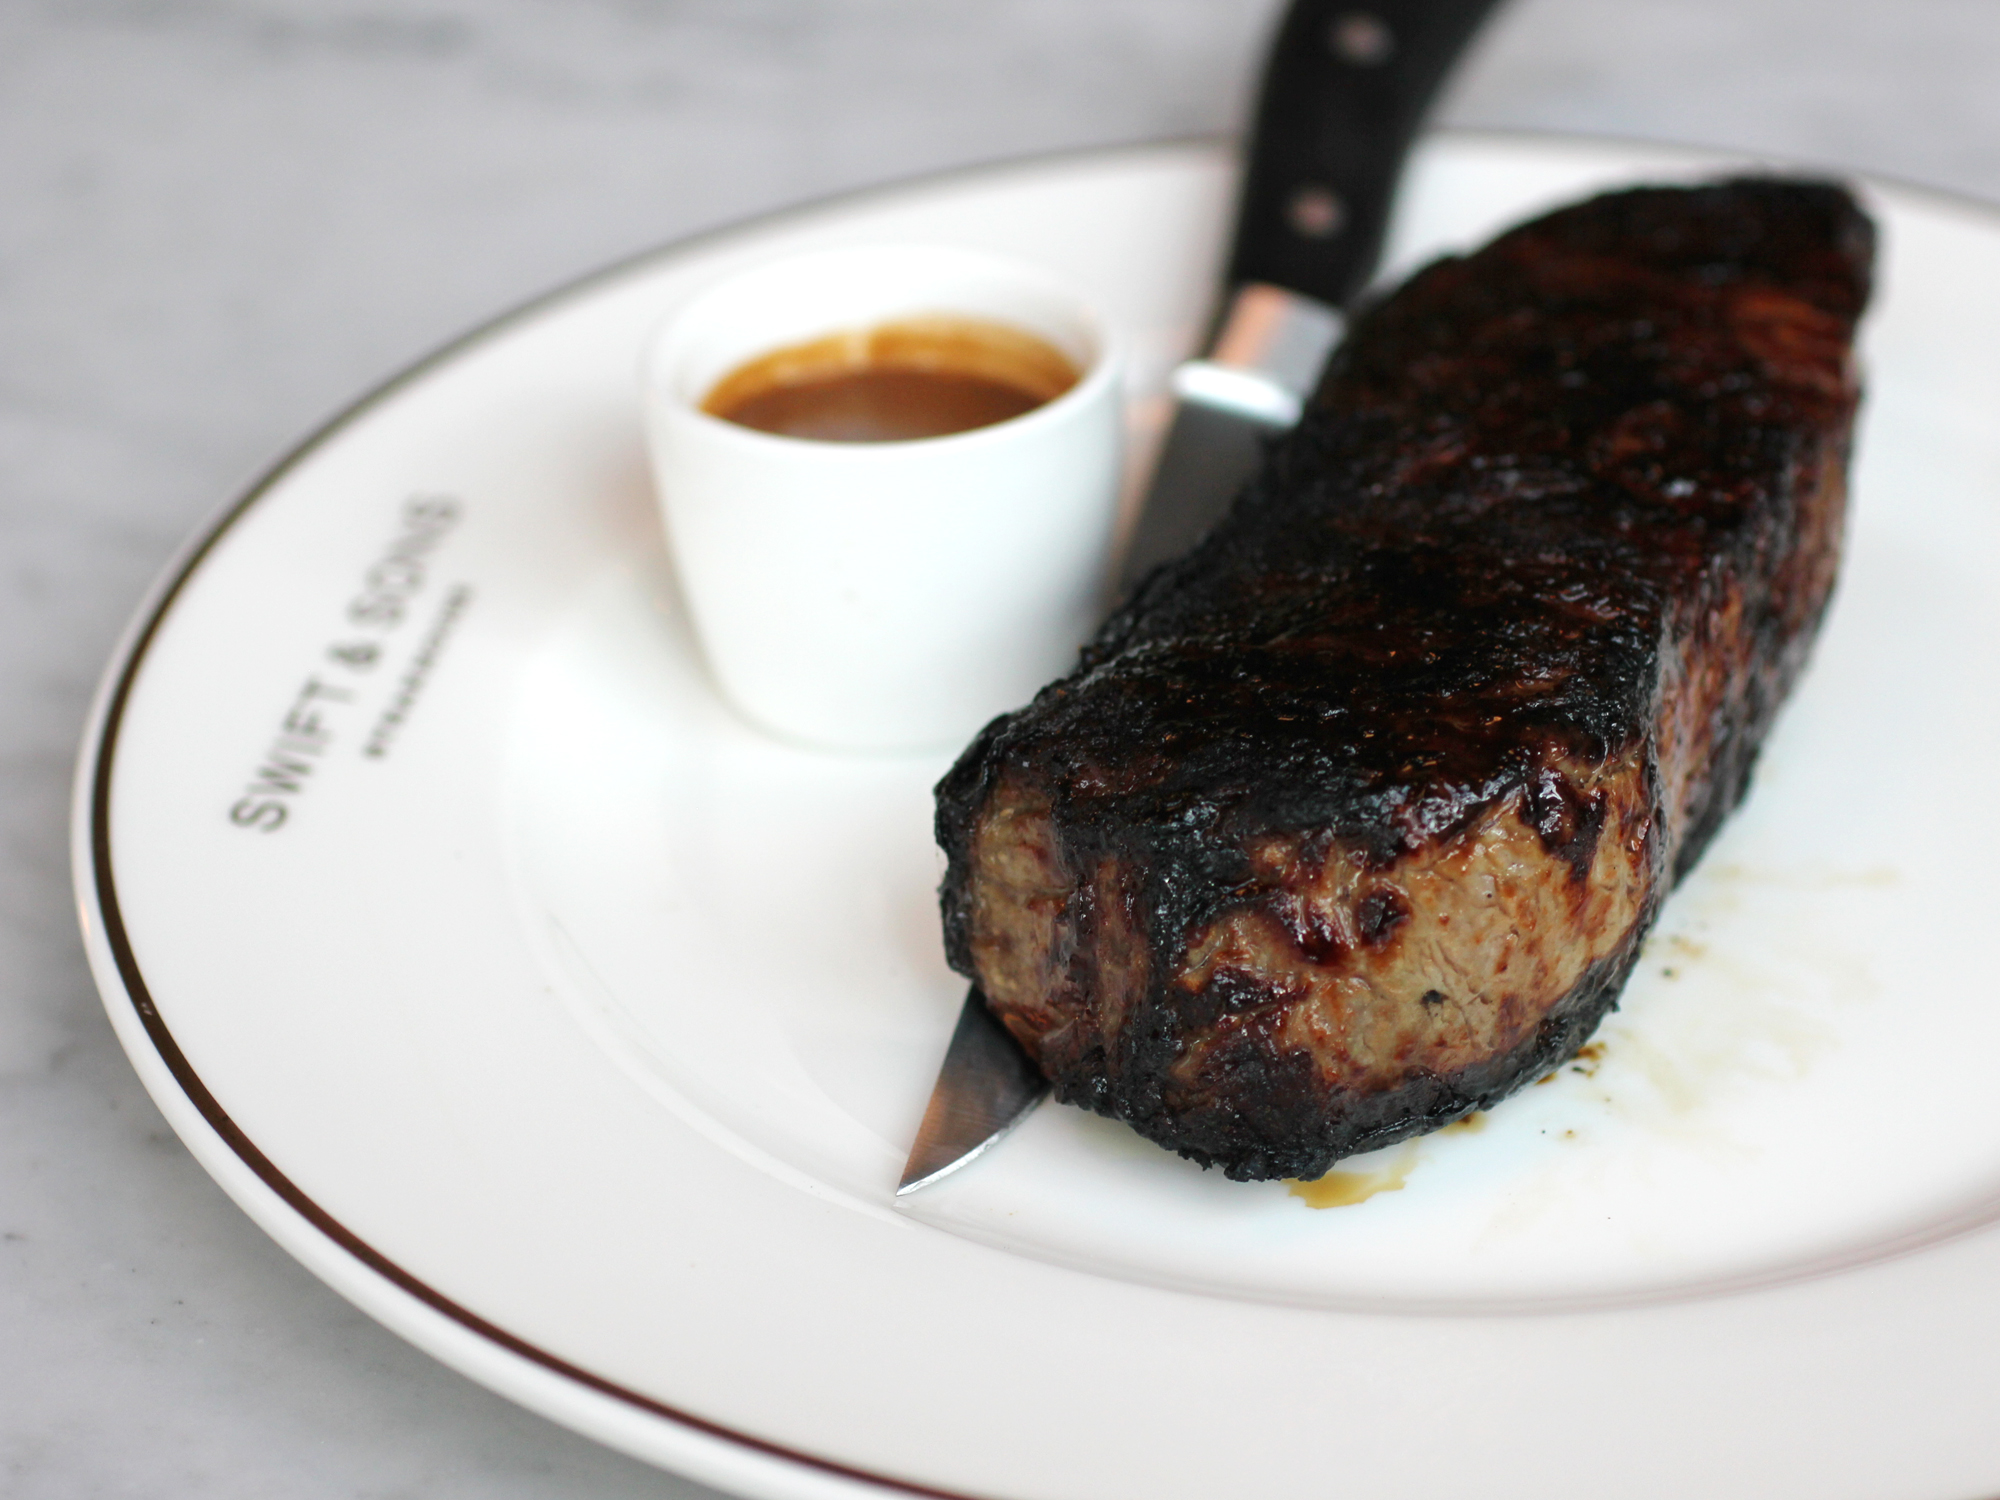 CAN A WHOLE ANIMAL CHEF DO A CHICAGO STEAKHOUSE?